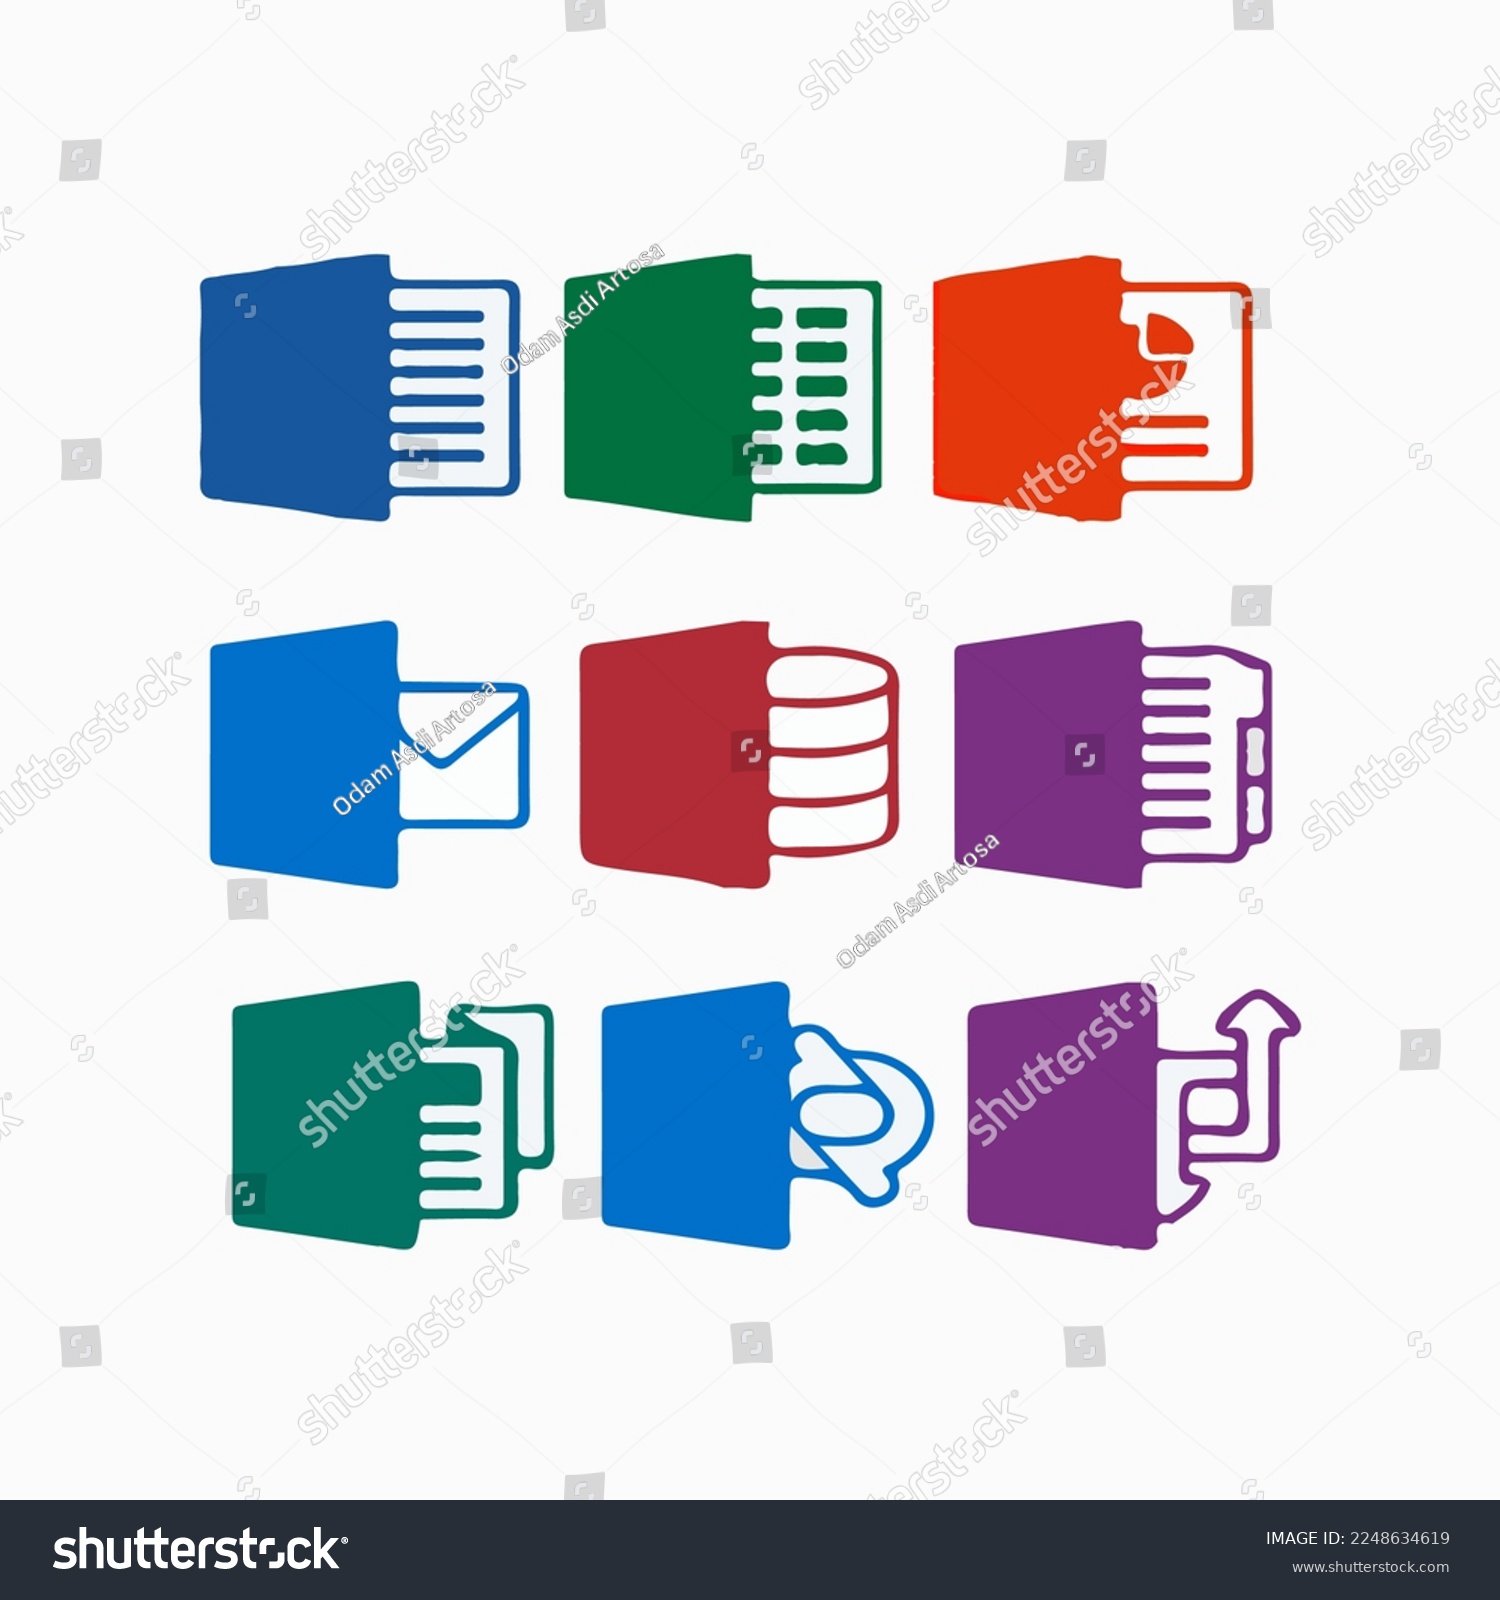 SVG of Document file format icons set. Isometric 3d illustration of 9 file format vector icons for web. Microsoft Word .doc Microsoft Excel .xls Microsoft PowerPoint .ppt .pdf Adobe Acrobat, Nitro, Foxit svg